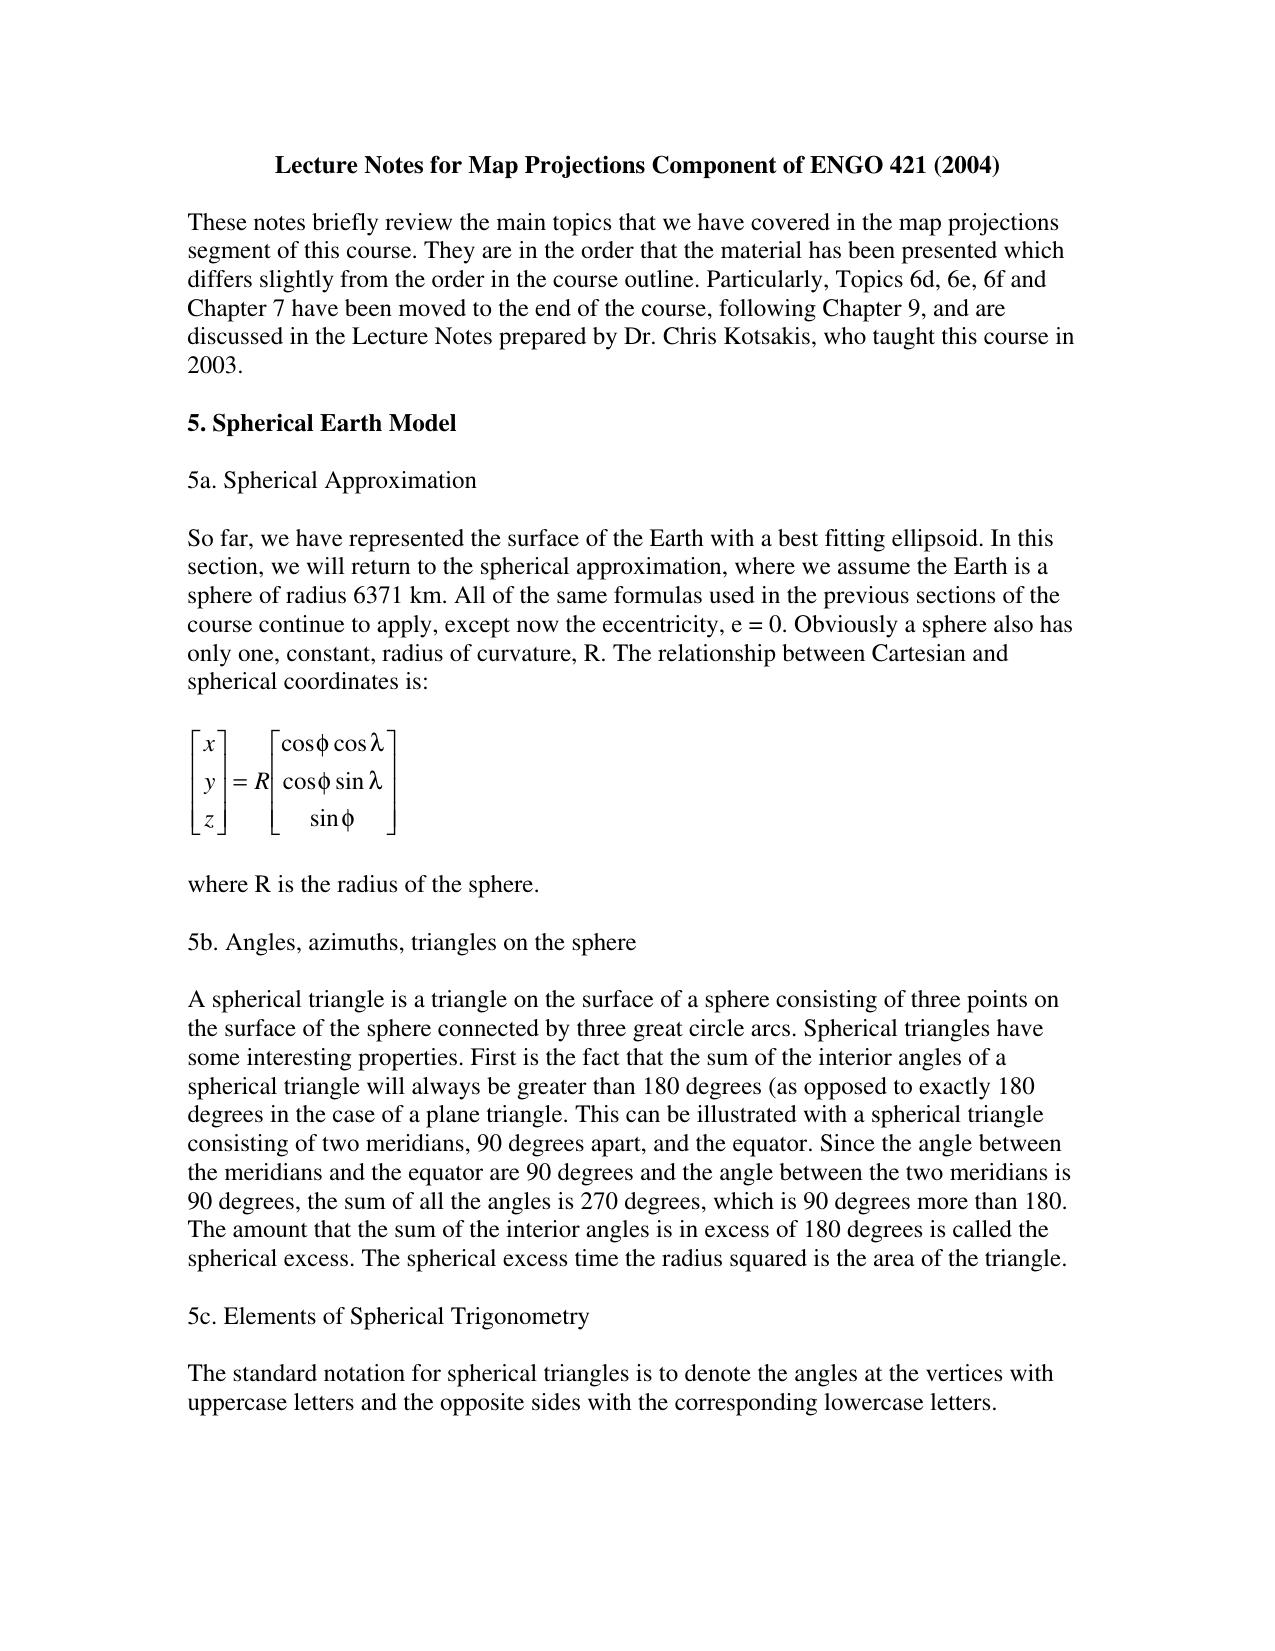 MapProjections2004_Nov18_.PDF